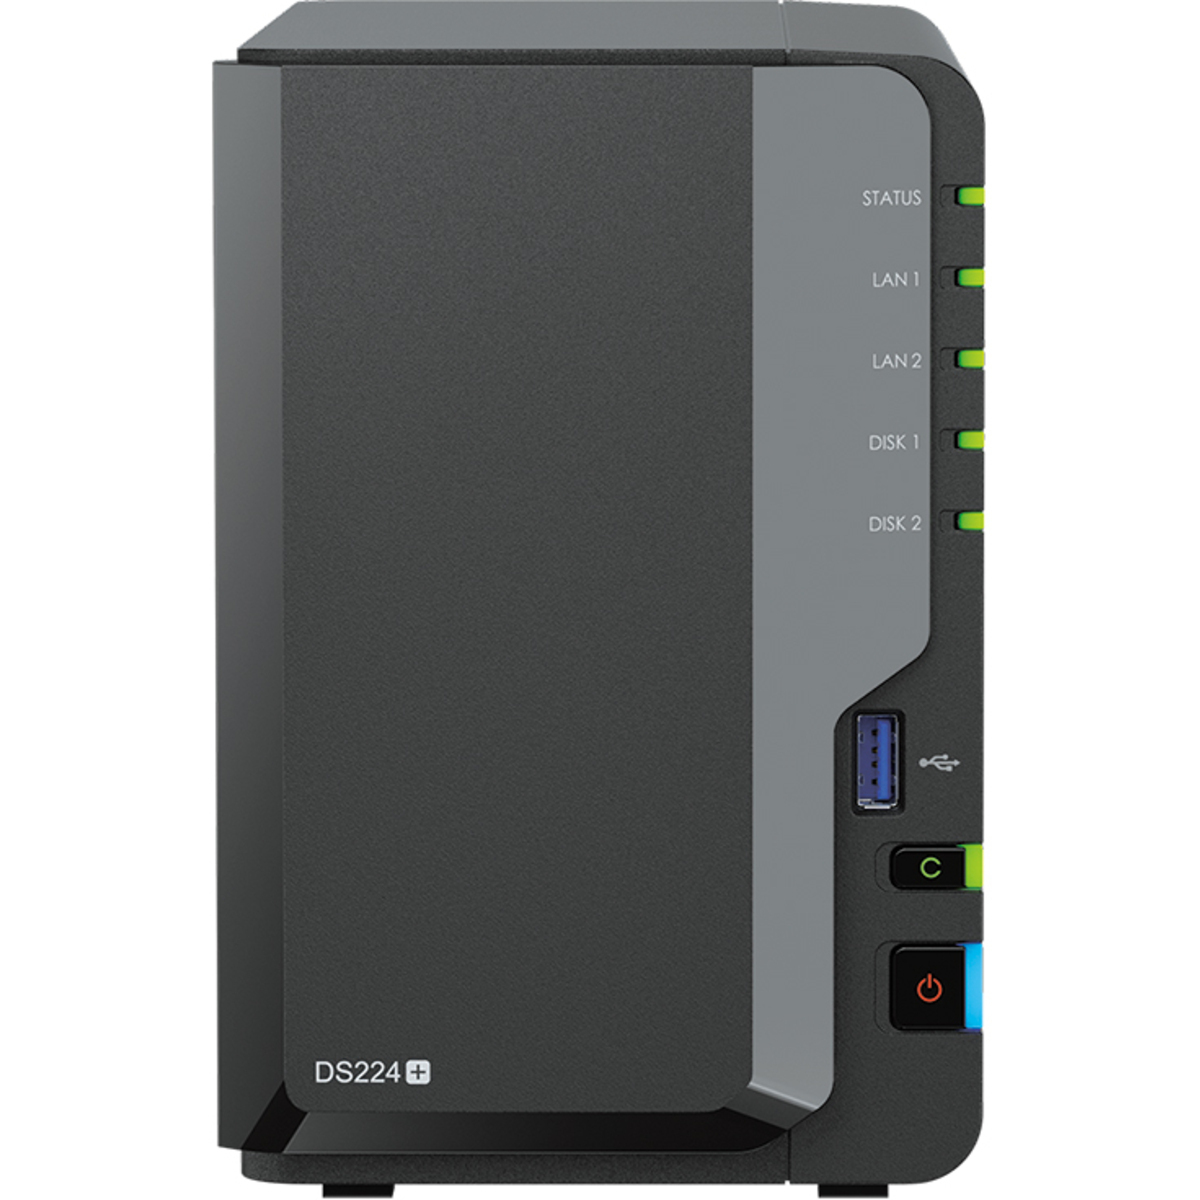 Synology DiskStation DS224+ 28tb 2-Bay Desktop Personal / Basic Home / Small Office NAS - Network Attached Storage Device 2x14tb Seagate IronWolf Pro ST14000NT001 3.5 7200rpm SATA 6Gb/s HDD NAS Class Drives Installed - Burn-In Tested - ON SALE - FREE RAM UPGRADE DiskStation DS224+